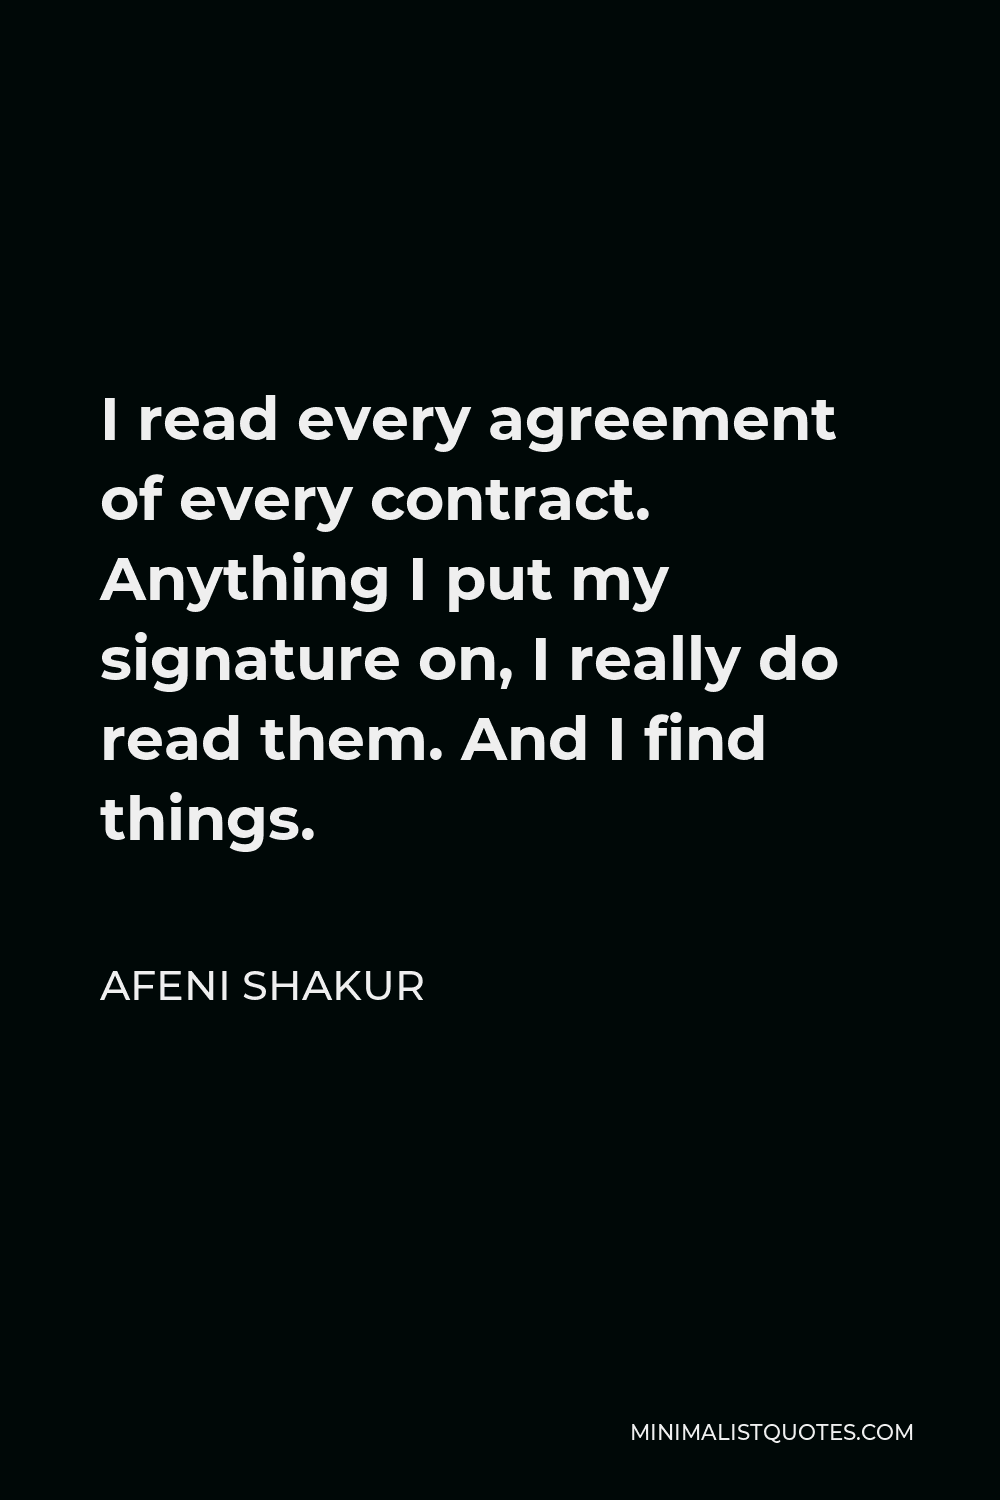 Afeni Shakur Quote - I read every agreement of every contract. Anything I put my signature on, I really do read them. And I find things.